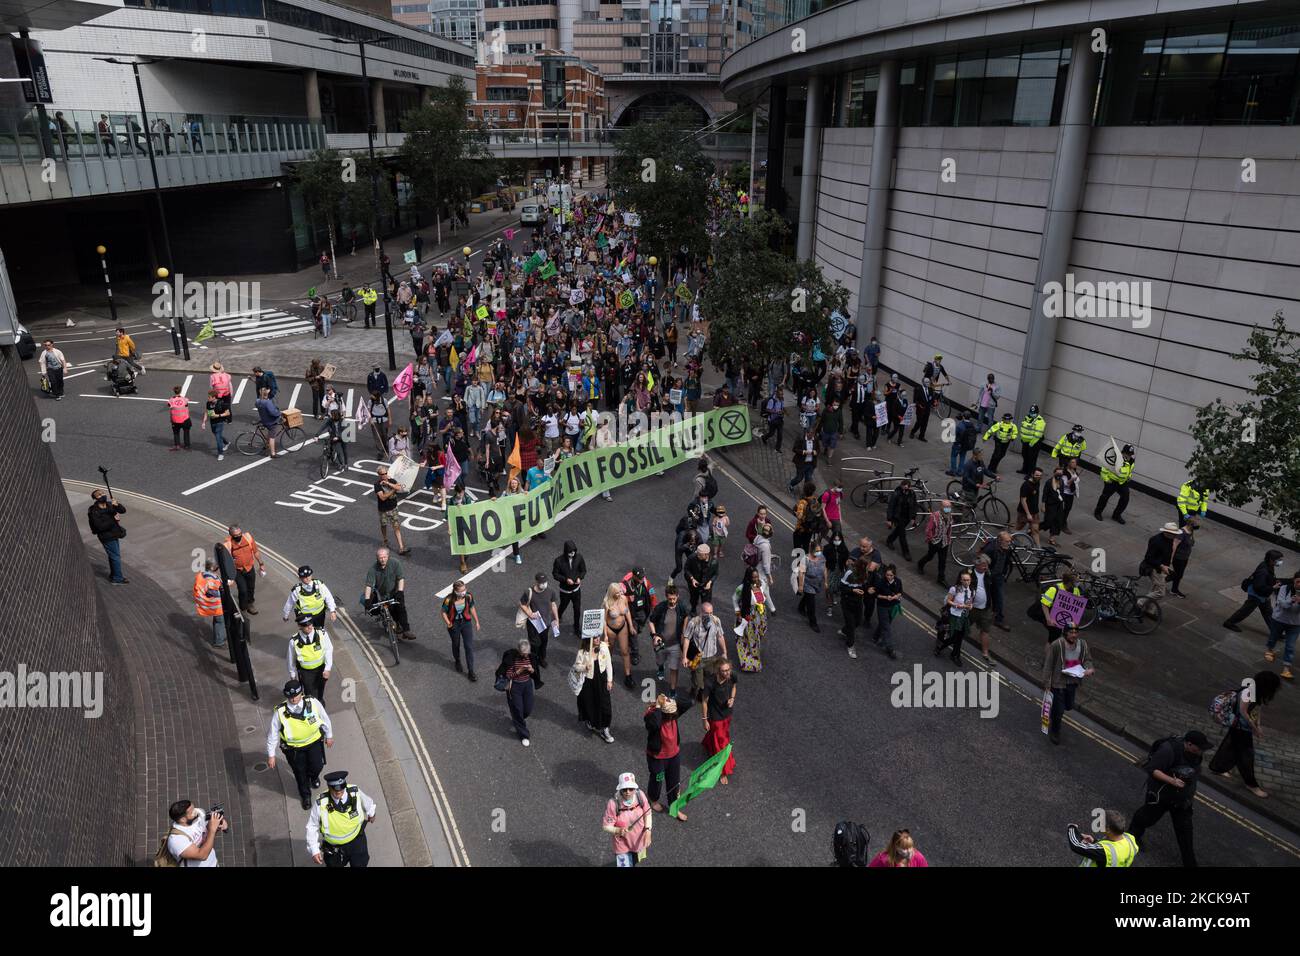 LONDON, UNITED KINGDOM - AUGUST 27, 2021: Environmental activists from Extinction Rebellion march through the City of London in a protest against the companies and institutions that are financing, insuring and enabling major fossil fuel projects and extraction of resources in the developing countries of the Global South, demanding change to the colonial system that drives the crises of climate and racism on 27 August 2021 in London, England. Extinction Rebellion activists target the City of London during the two week 'Impossible Rebellion' action to highlight the role of the UK's financial sec Stock Photo